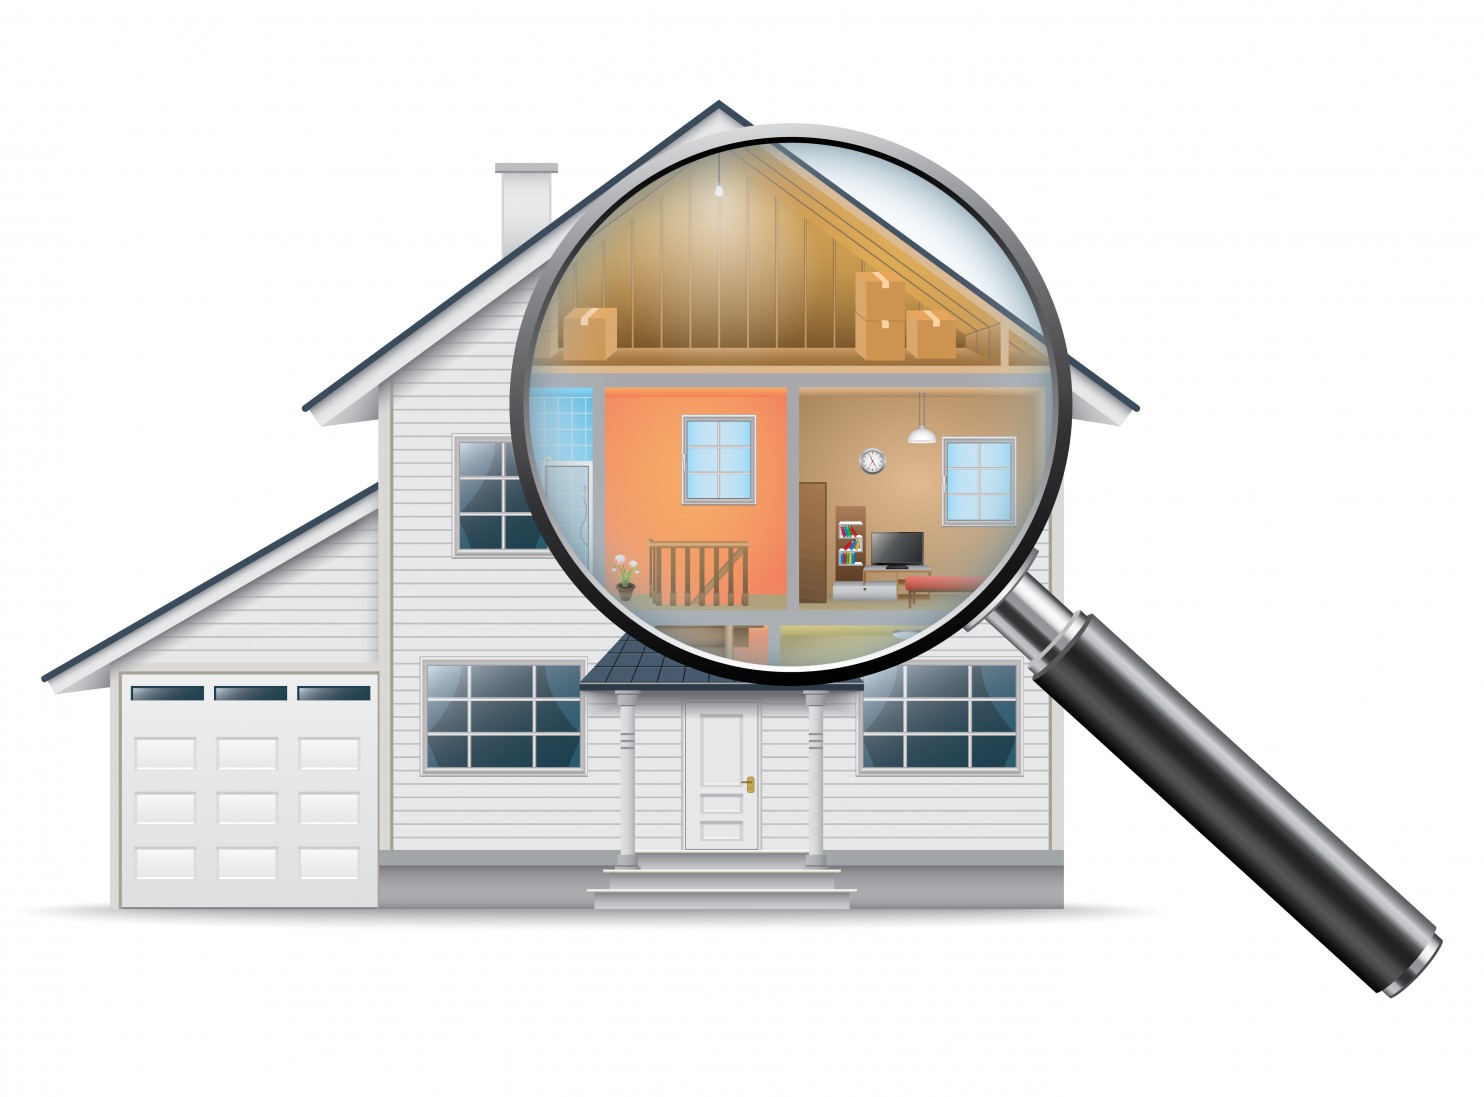 The Home Inspection